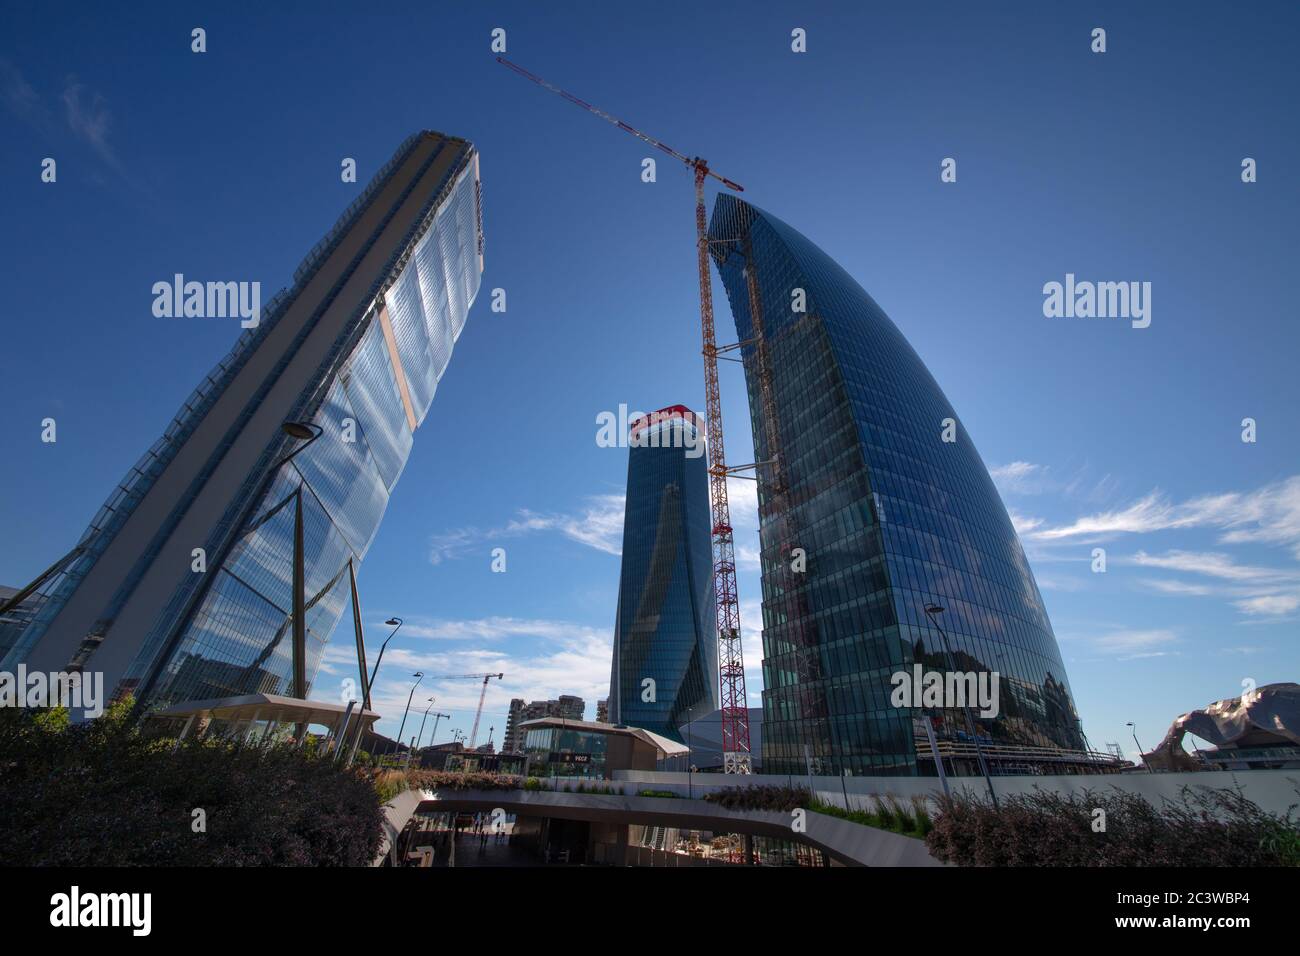 a beautiful photograph of the skyscrapers of citylife by day, Milan, Italy Stock Photo